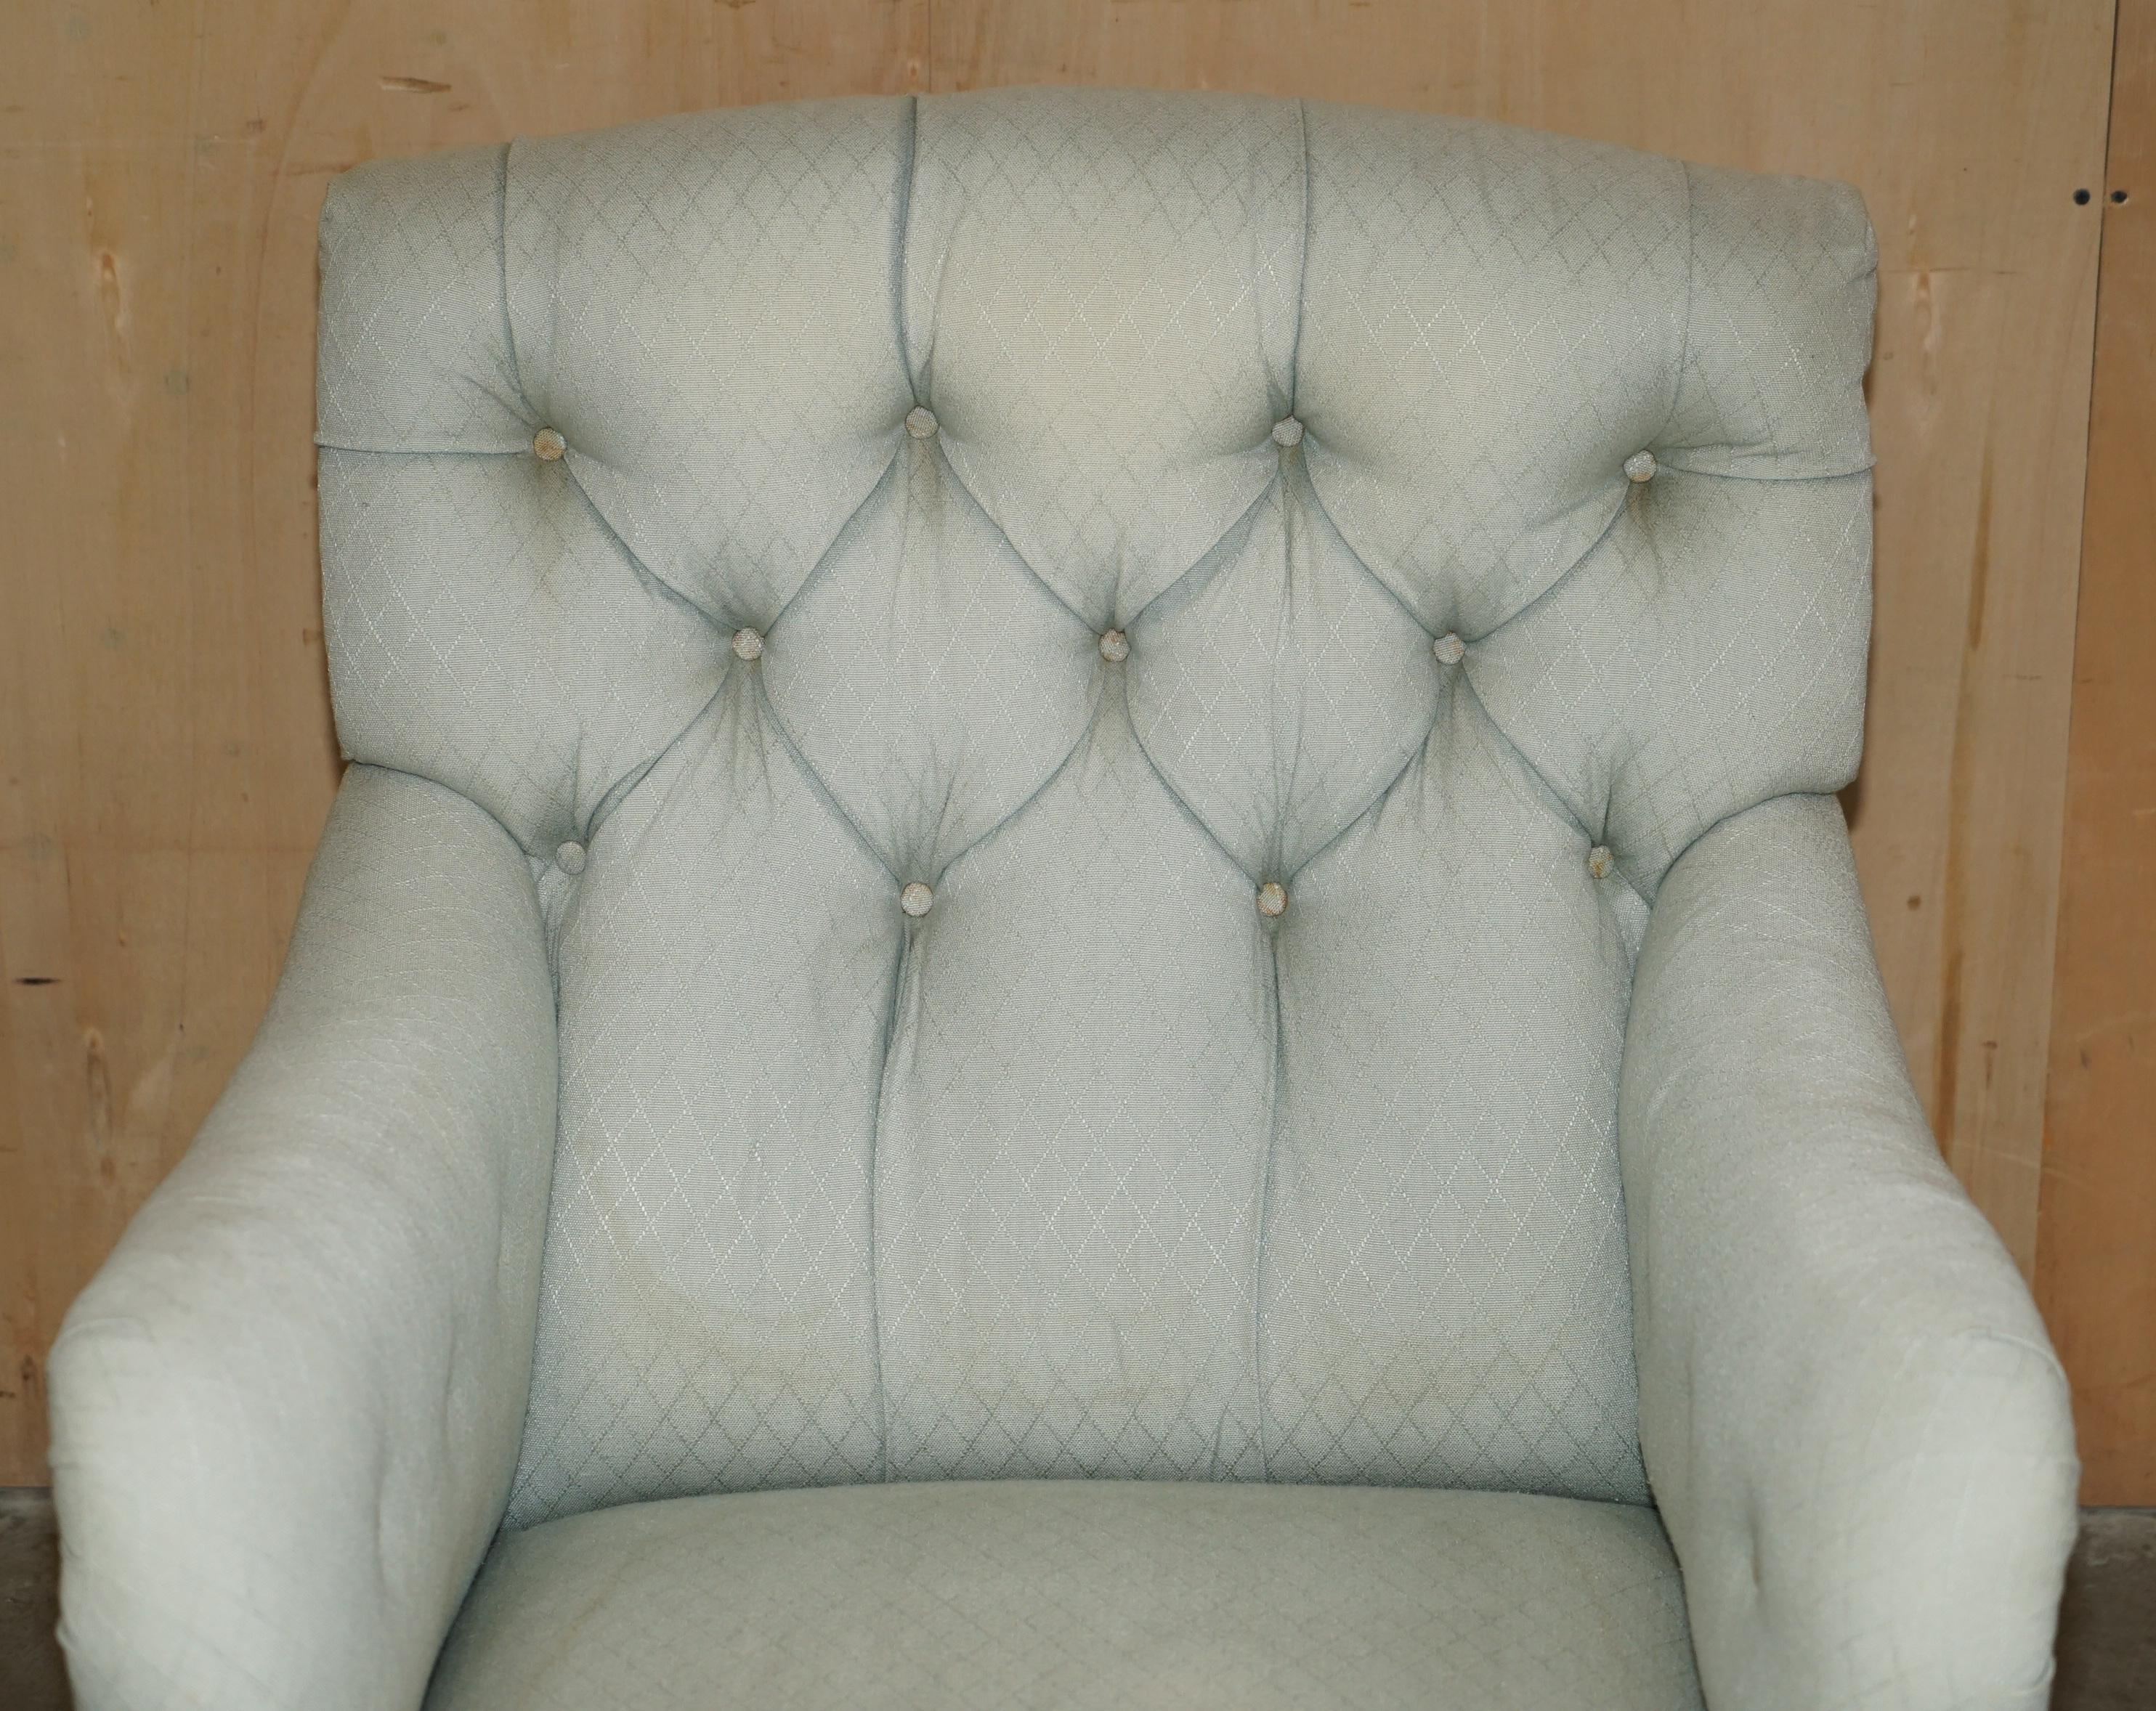 19th Century RARE ORIGINAL ViCTORIAN HOWARD & SONS BRIDGEWATER ARMCHAIR PERIOD UPHOLSTERY For Sale